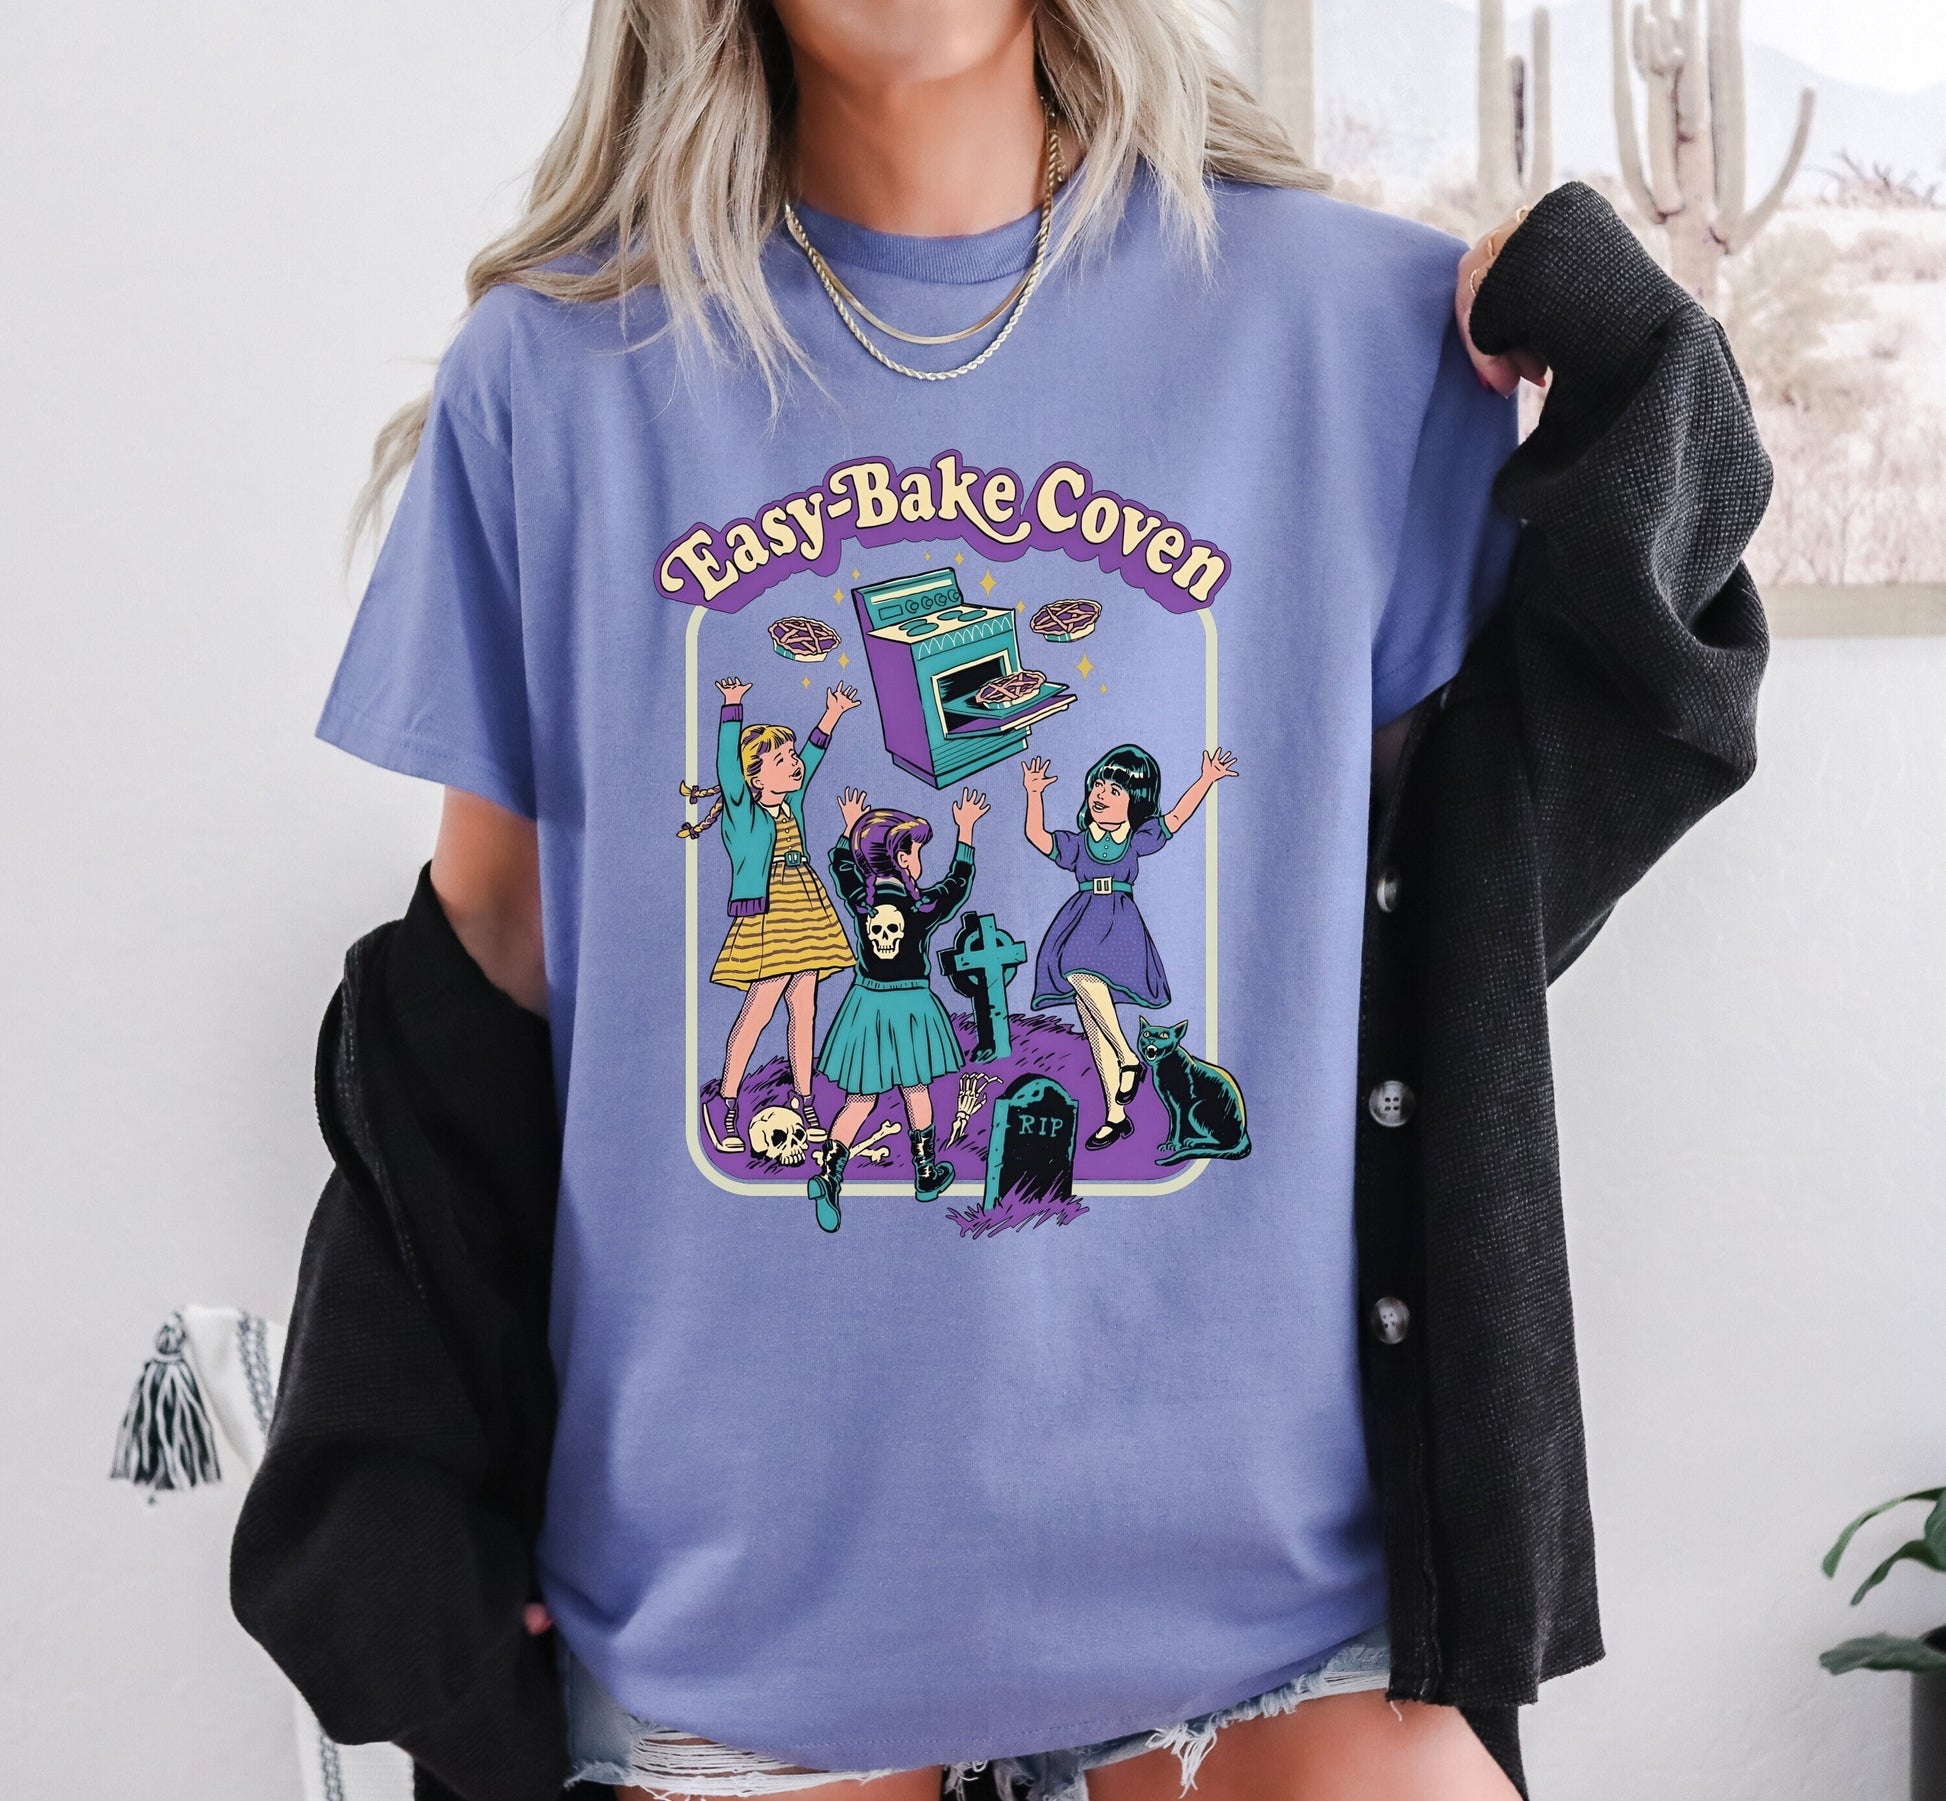 Vintage Easy Bake Coven Halloween Shirt - 90s Tee with Witchy Vibes and Purple Design